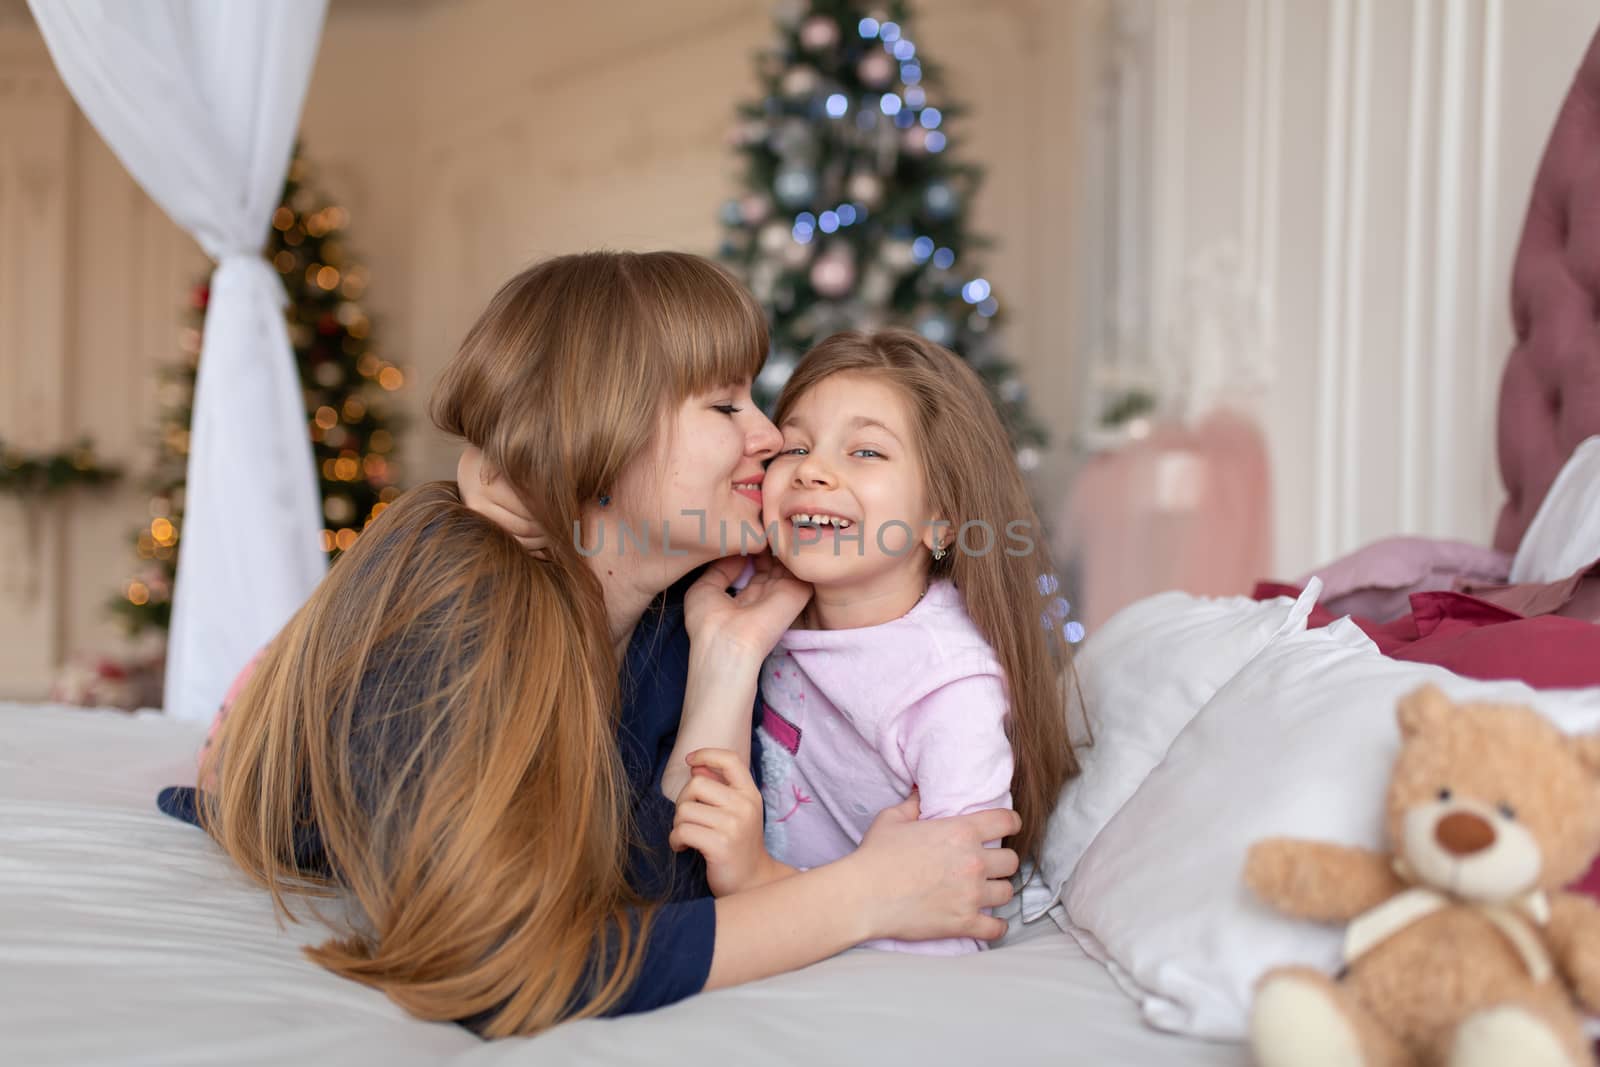 Little girl spends time playing with mom while lying in bed. Christmas tale. Happy childhood.